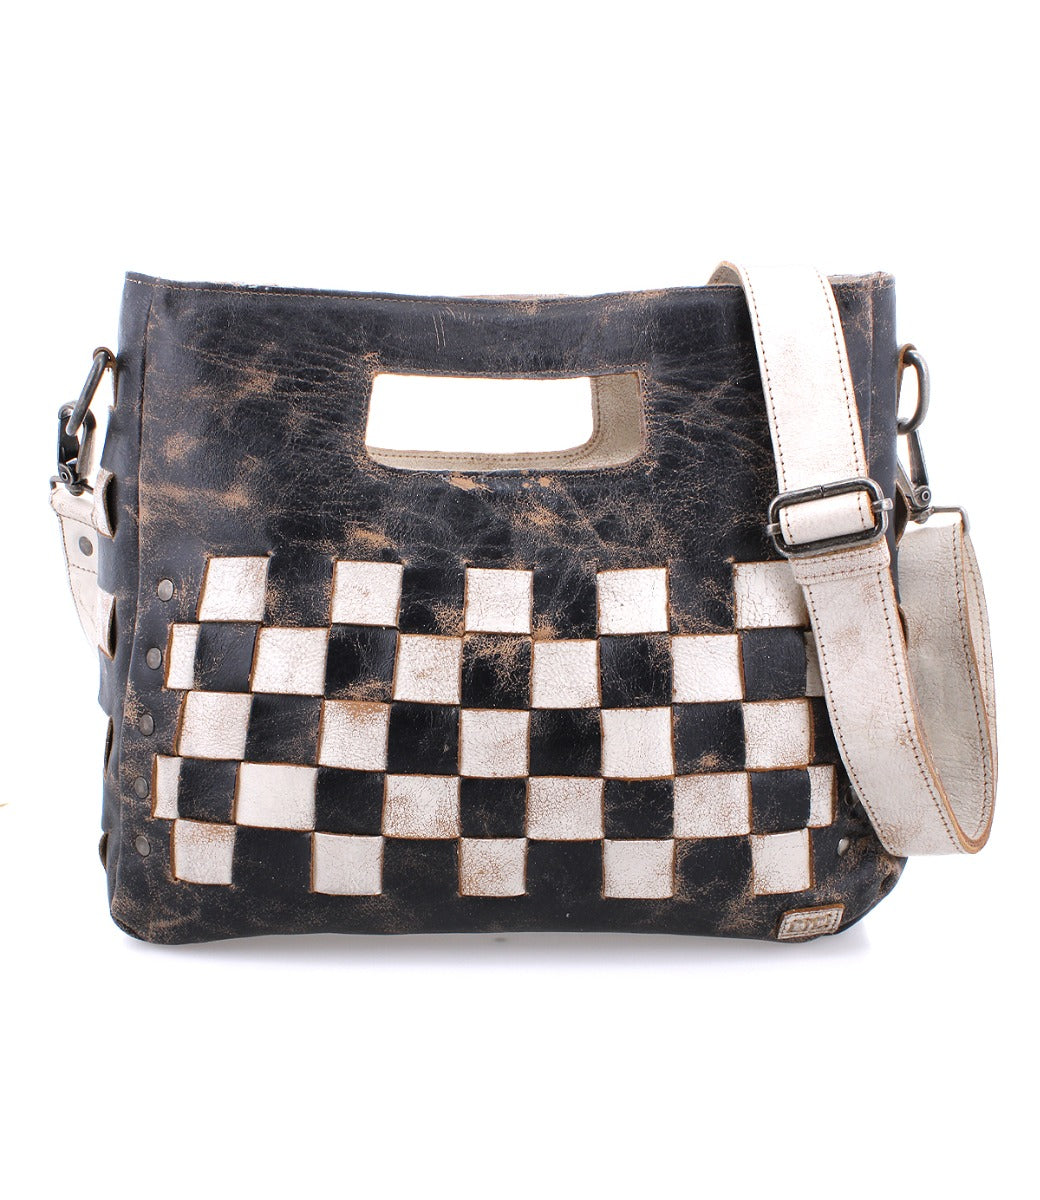 A distressed black and white leather Orchid bag with a checkered pattern by Bed Stu.